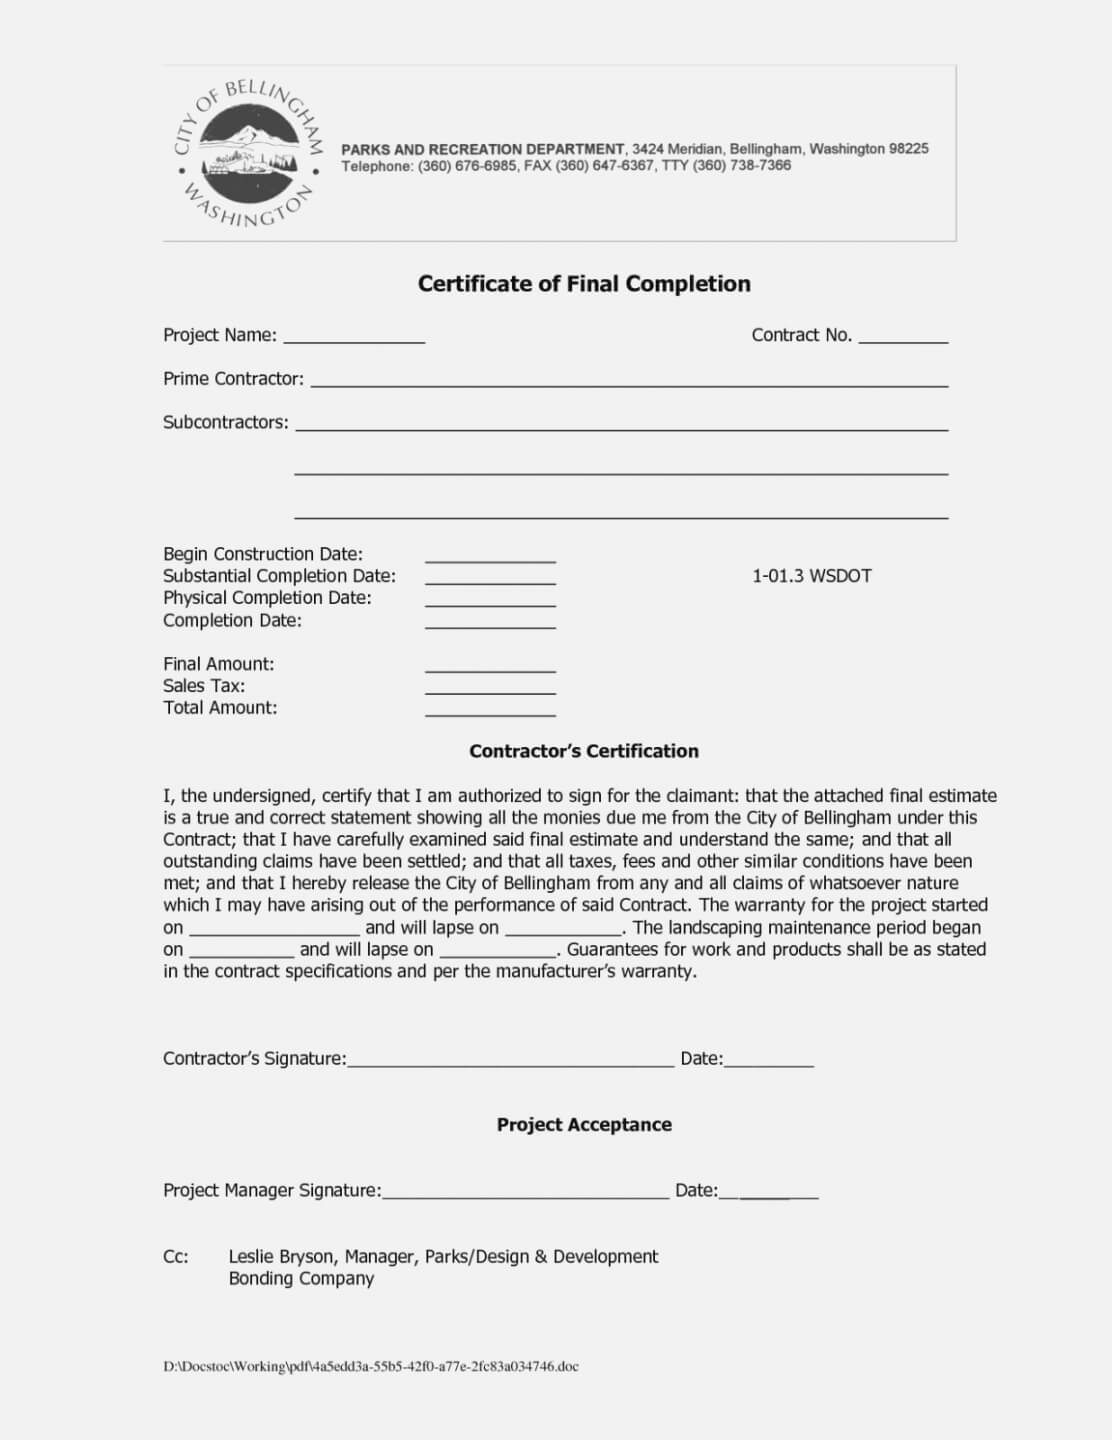 Roofing Certificate Of Completion Template For Roof Certification Template